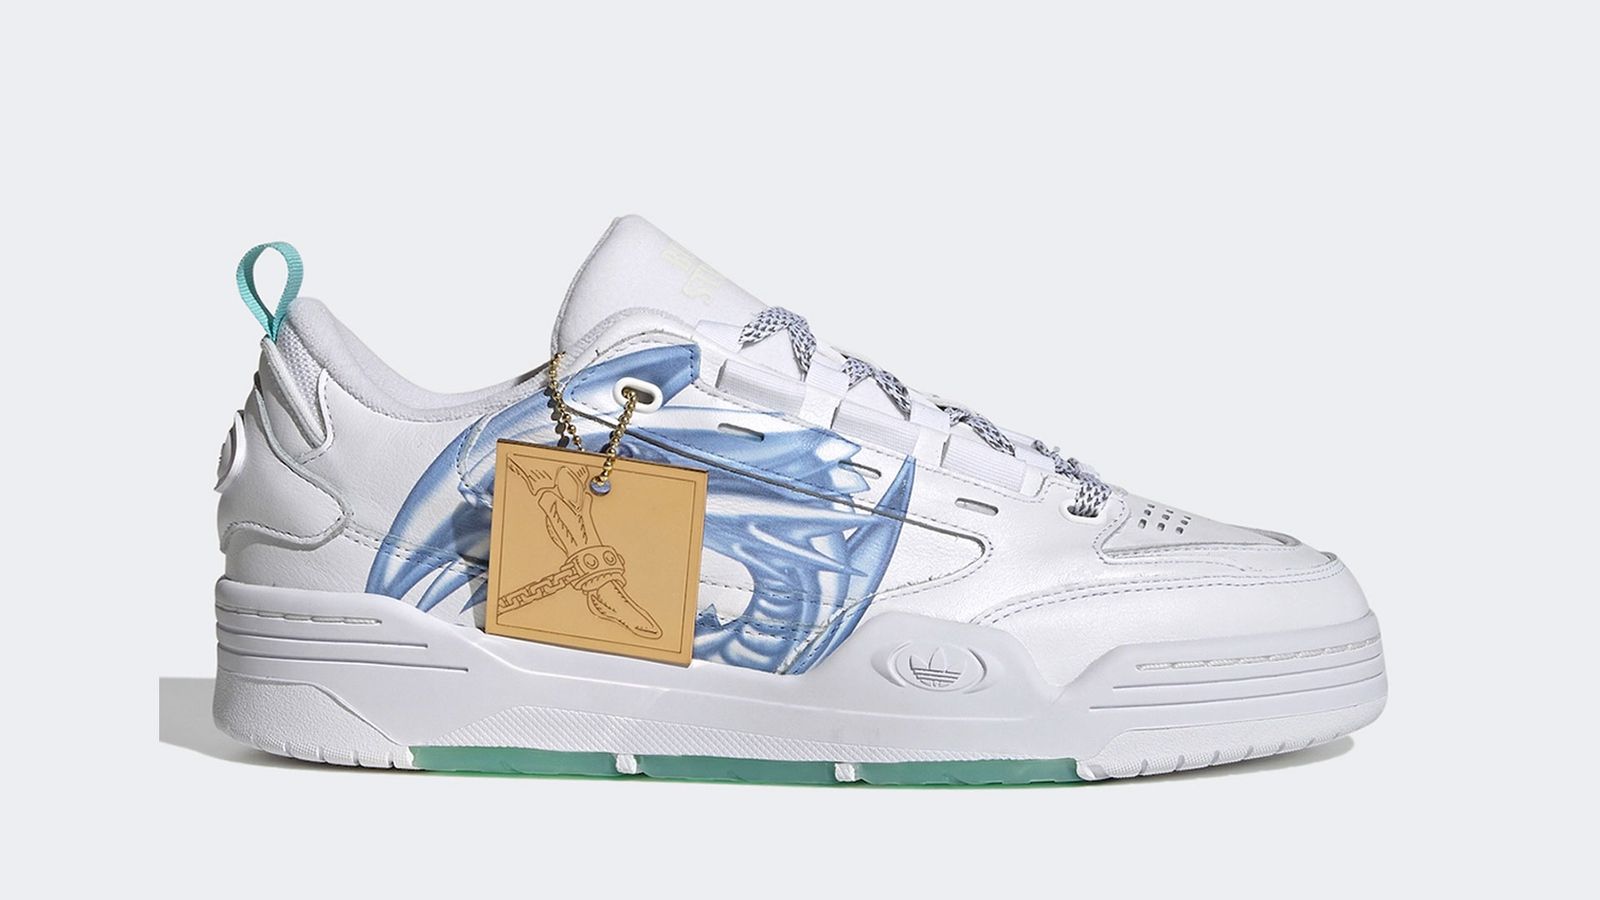 Yu-Gi-Oh! x adidas ADI2000 product image of a white sneaker with a graphic of Blue Eyes White Dragon on the side and a golden hang tag.